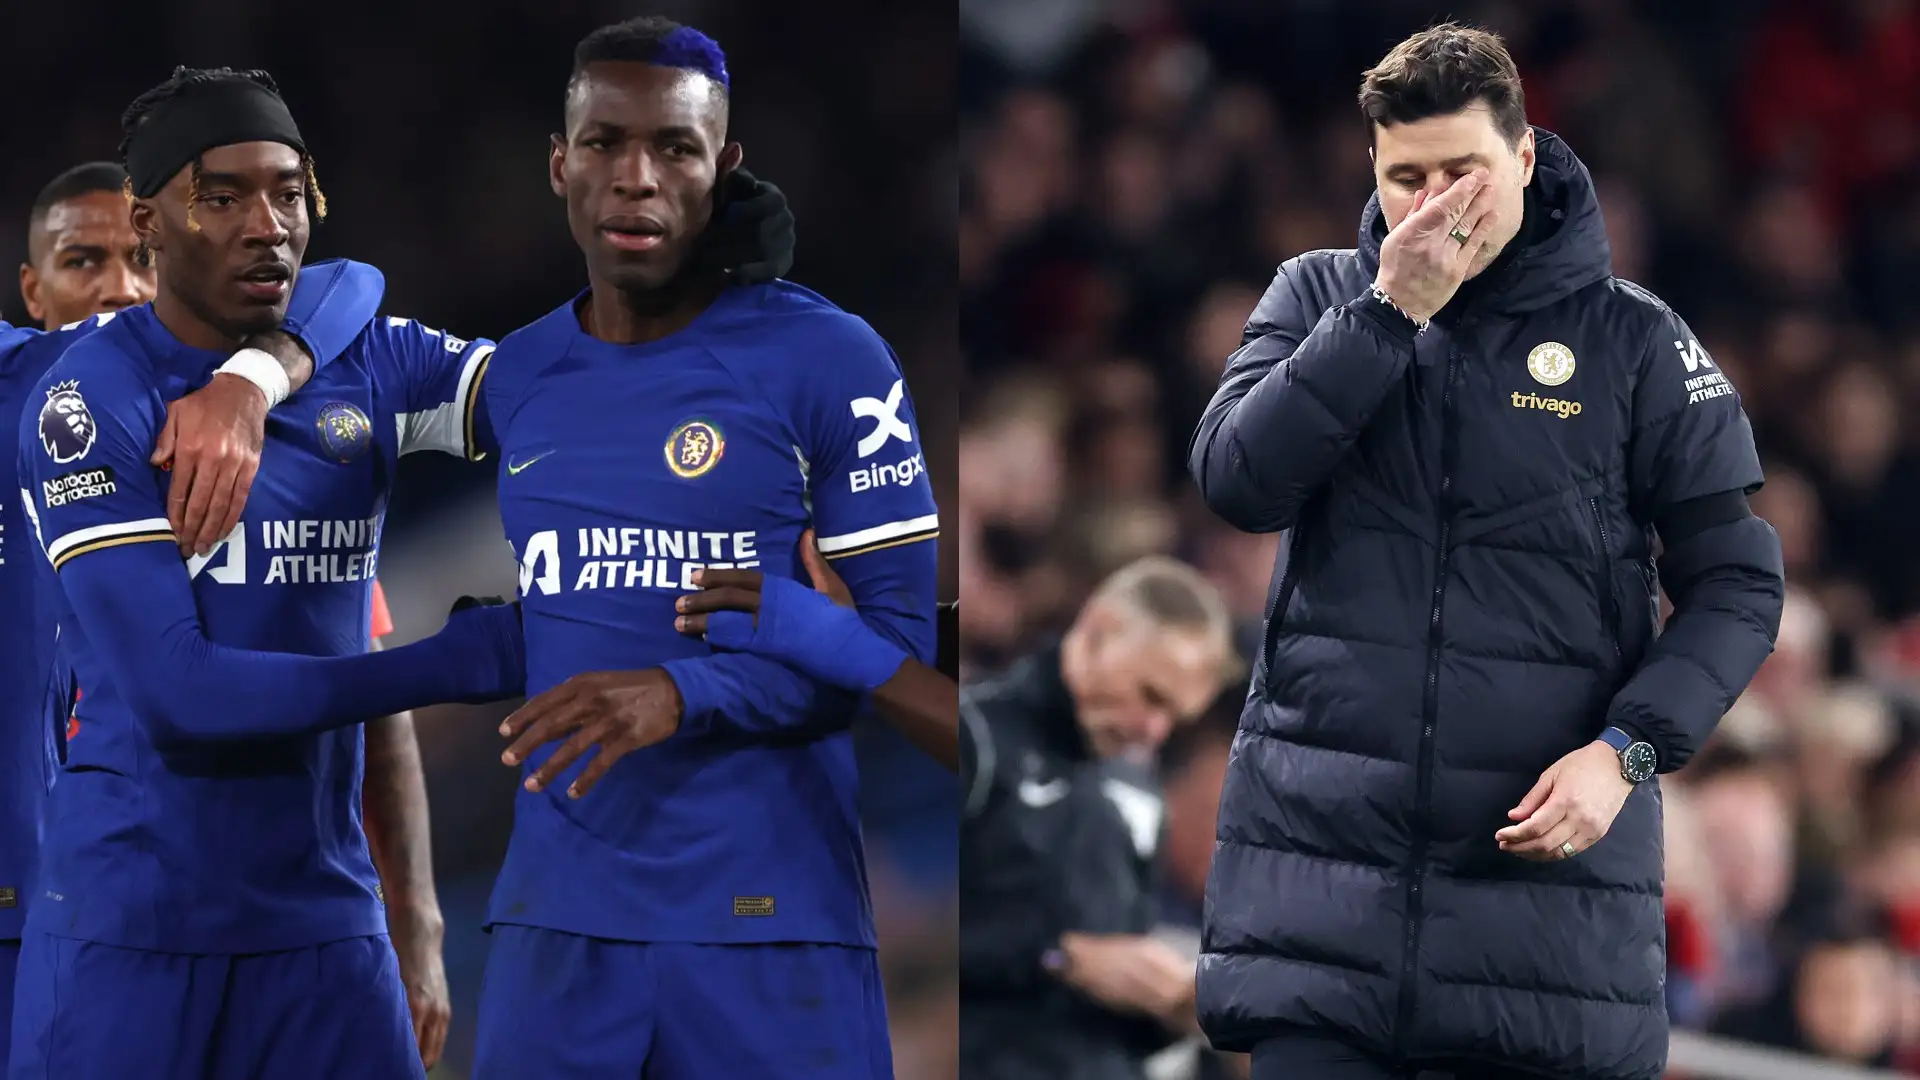 Revealed: Mauricio Pochettino exit sparks Chelsea squad ‘meltdown’ on WhatsApp as players had ‘no idea’ announcement was coming